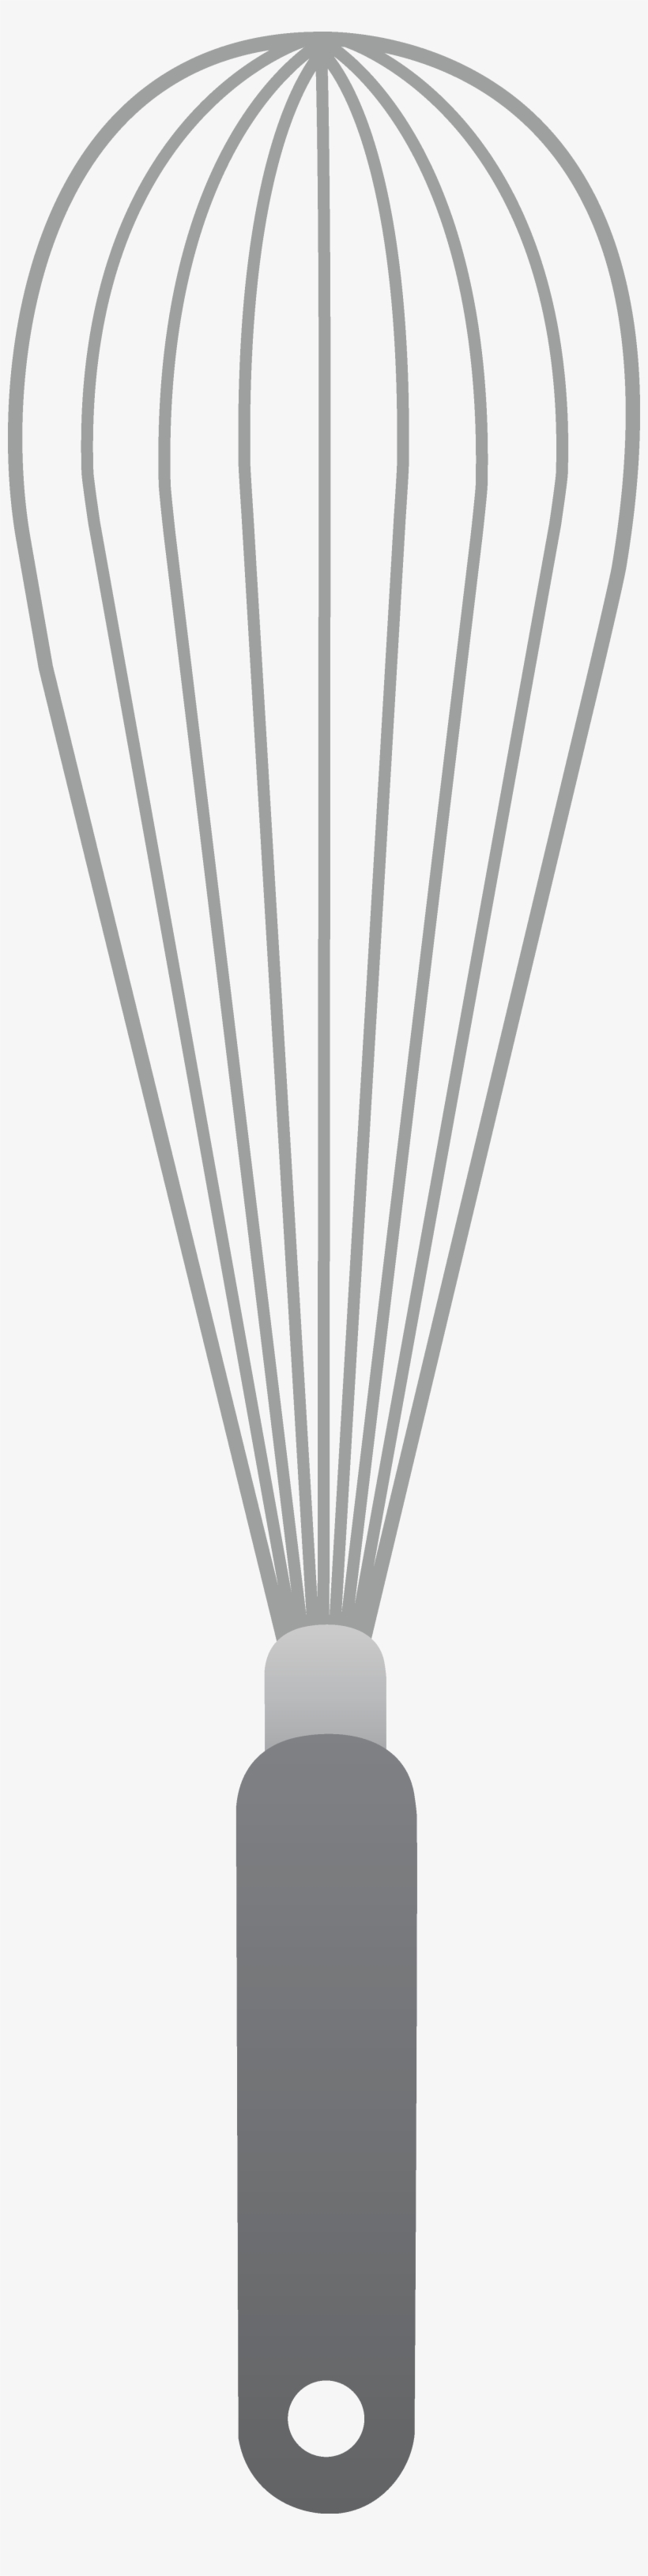 Free Clip Art - Whisk Clipart, transparent png #4139682